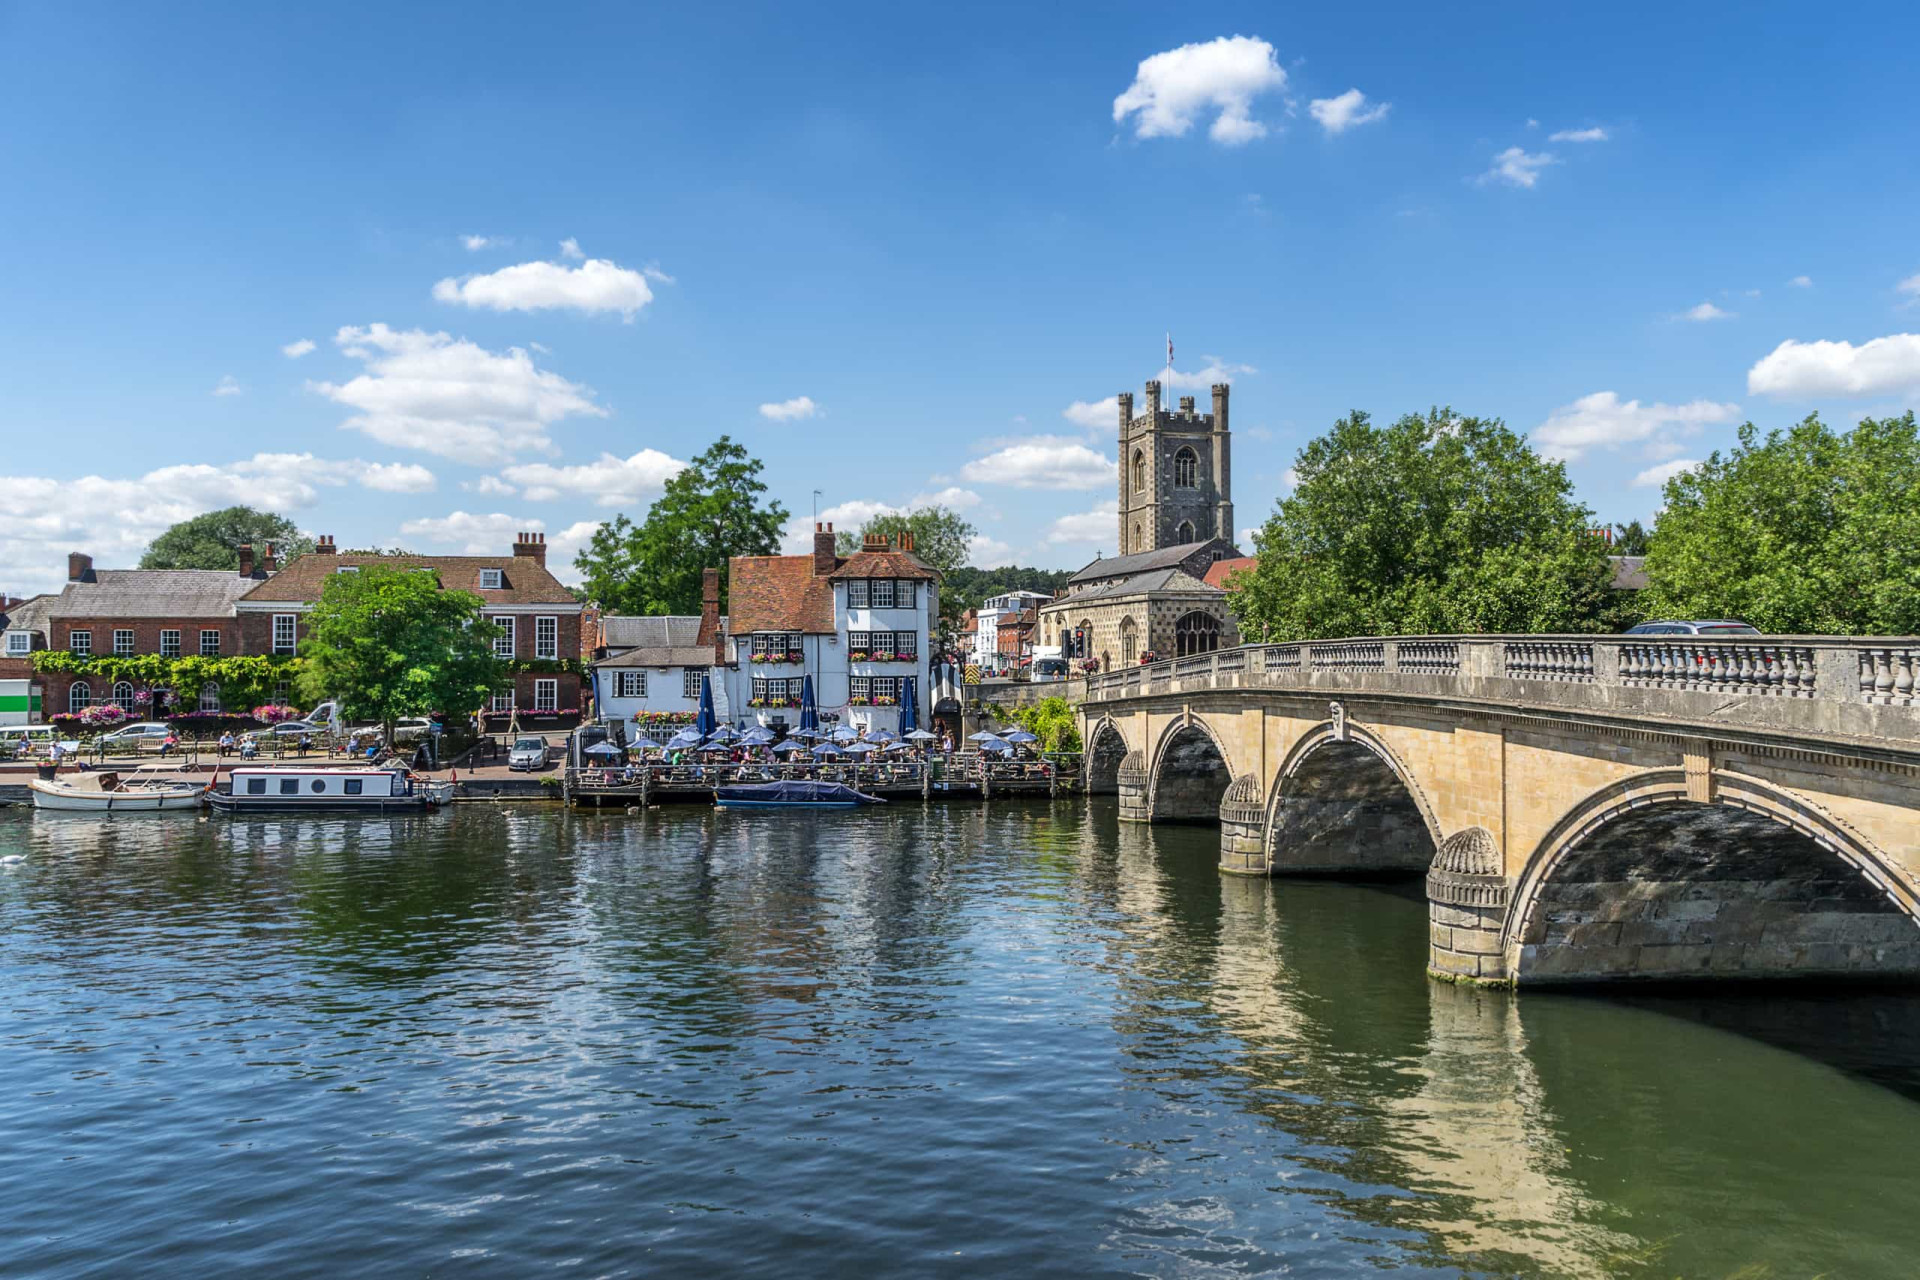 <p>Henley in Oxfordshire is a wonderful town based on the <a href="https://www.starsinsider.com/travel/441438/fancy-a-sightseeing-cruise-along-the-river-thames" rel="noopener">River Thames</a>. Here you can see one of the best-ranked museums in the world, the River & Rowing Museum. There is also a lovely walk called the Thames Path National Trail that will take you through some beautiful spots.</p>